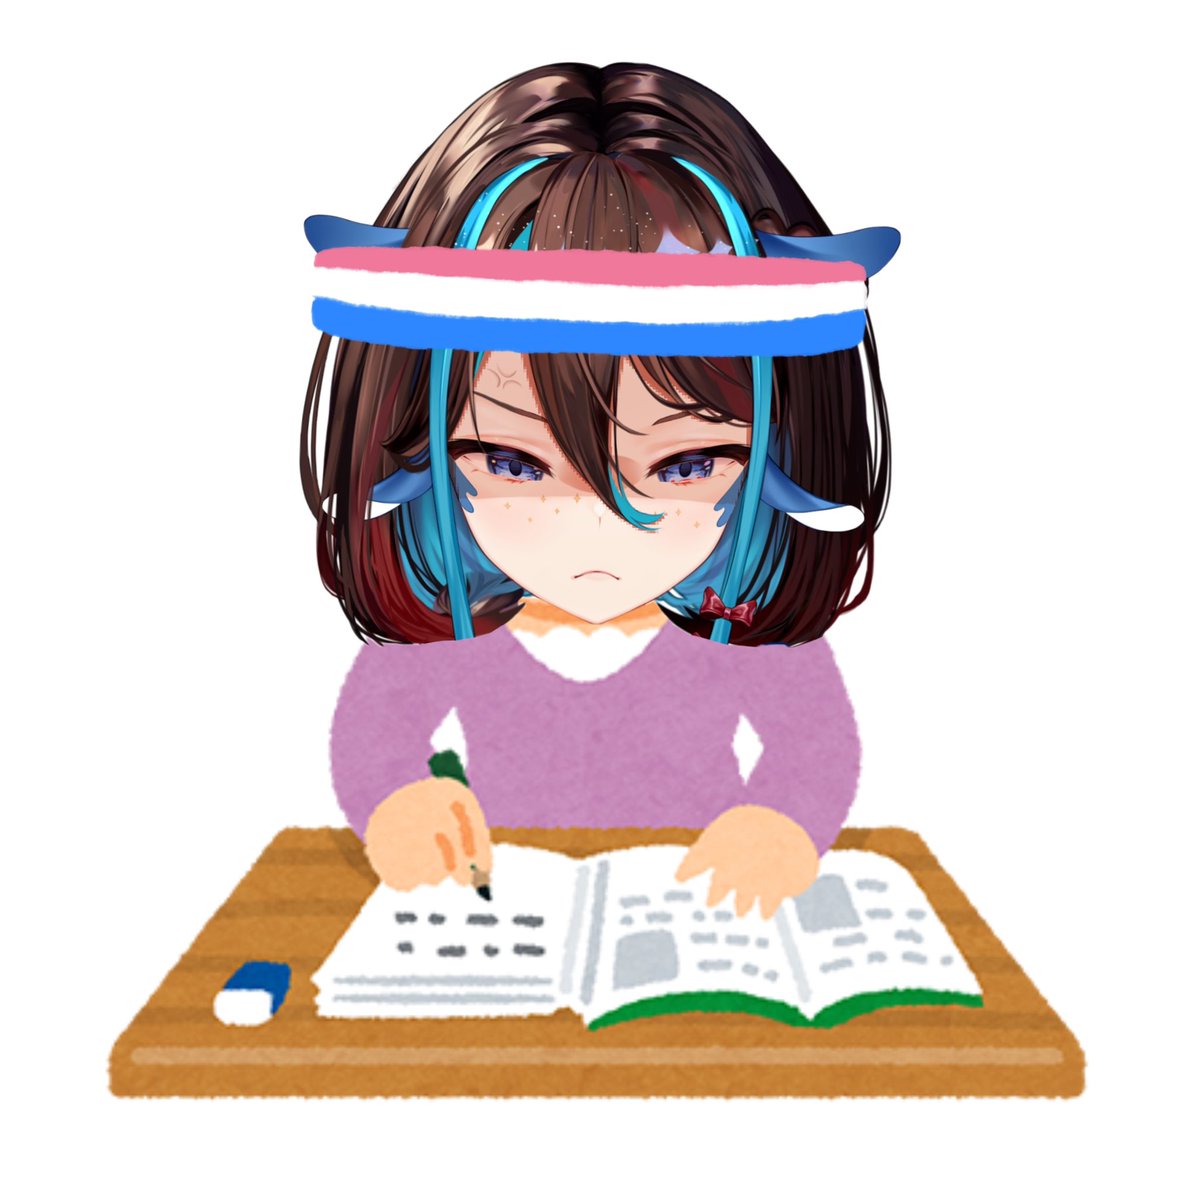 who else is studying hard for finals!! good luck to all of us m(_ _;)m
#StudentOfTheYear